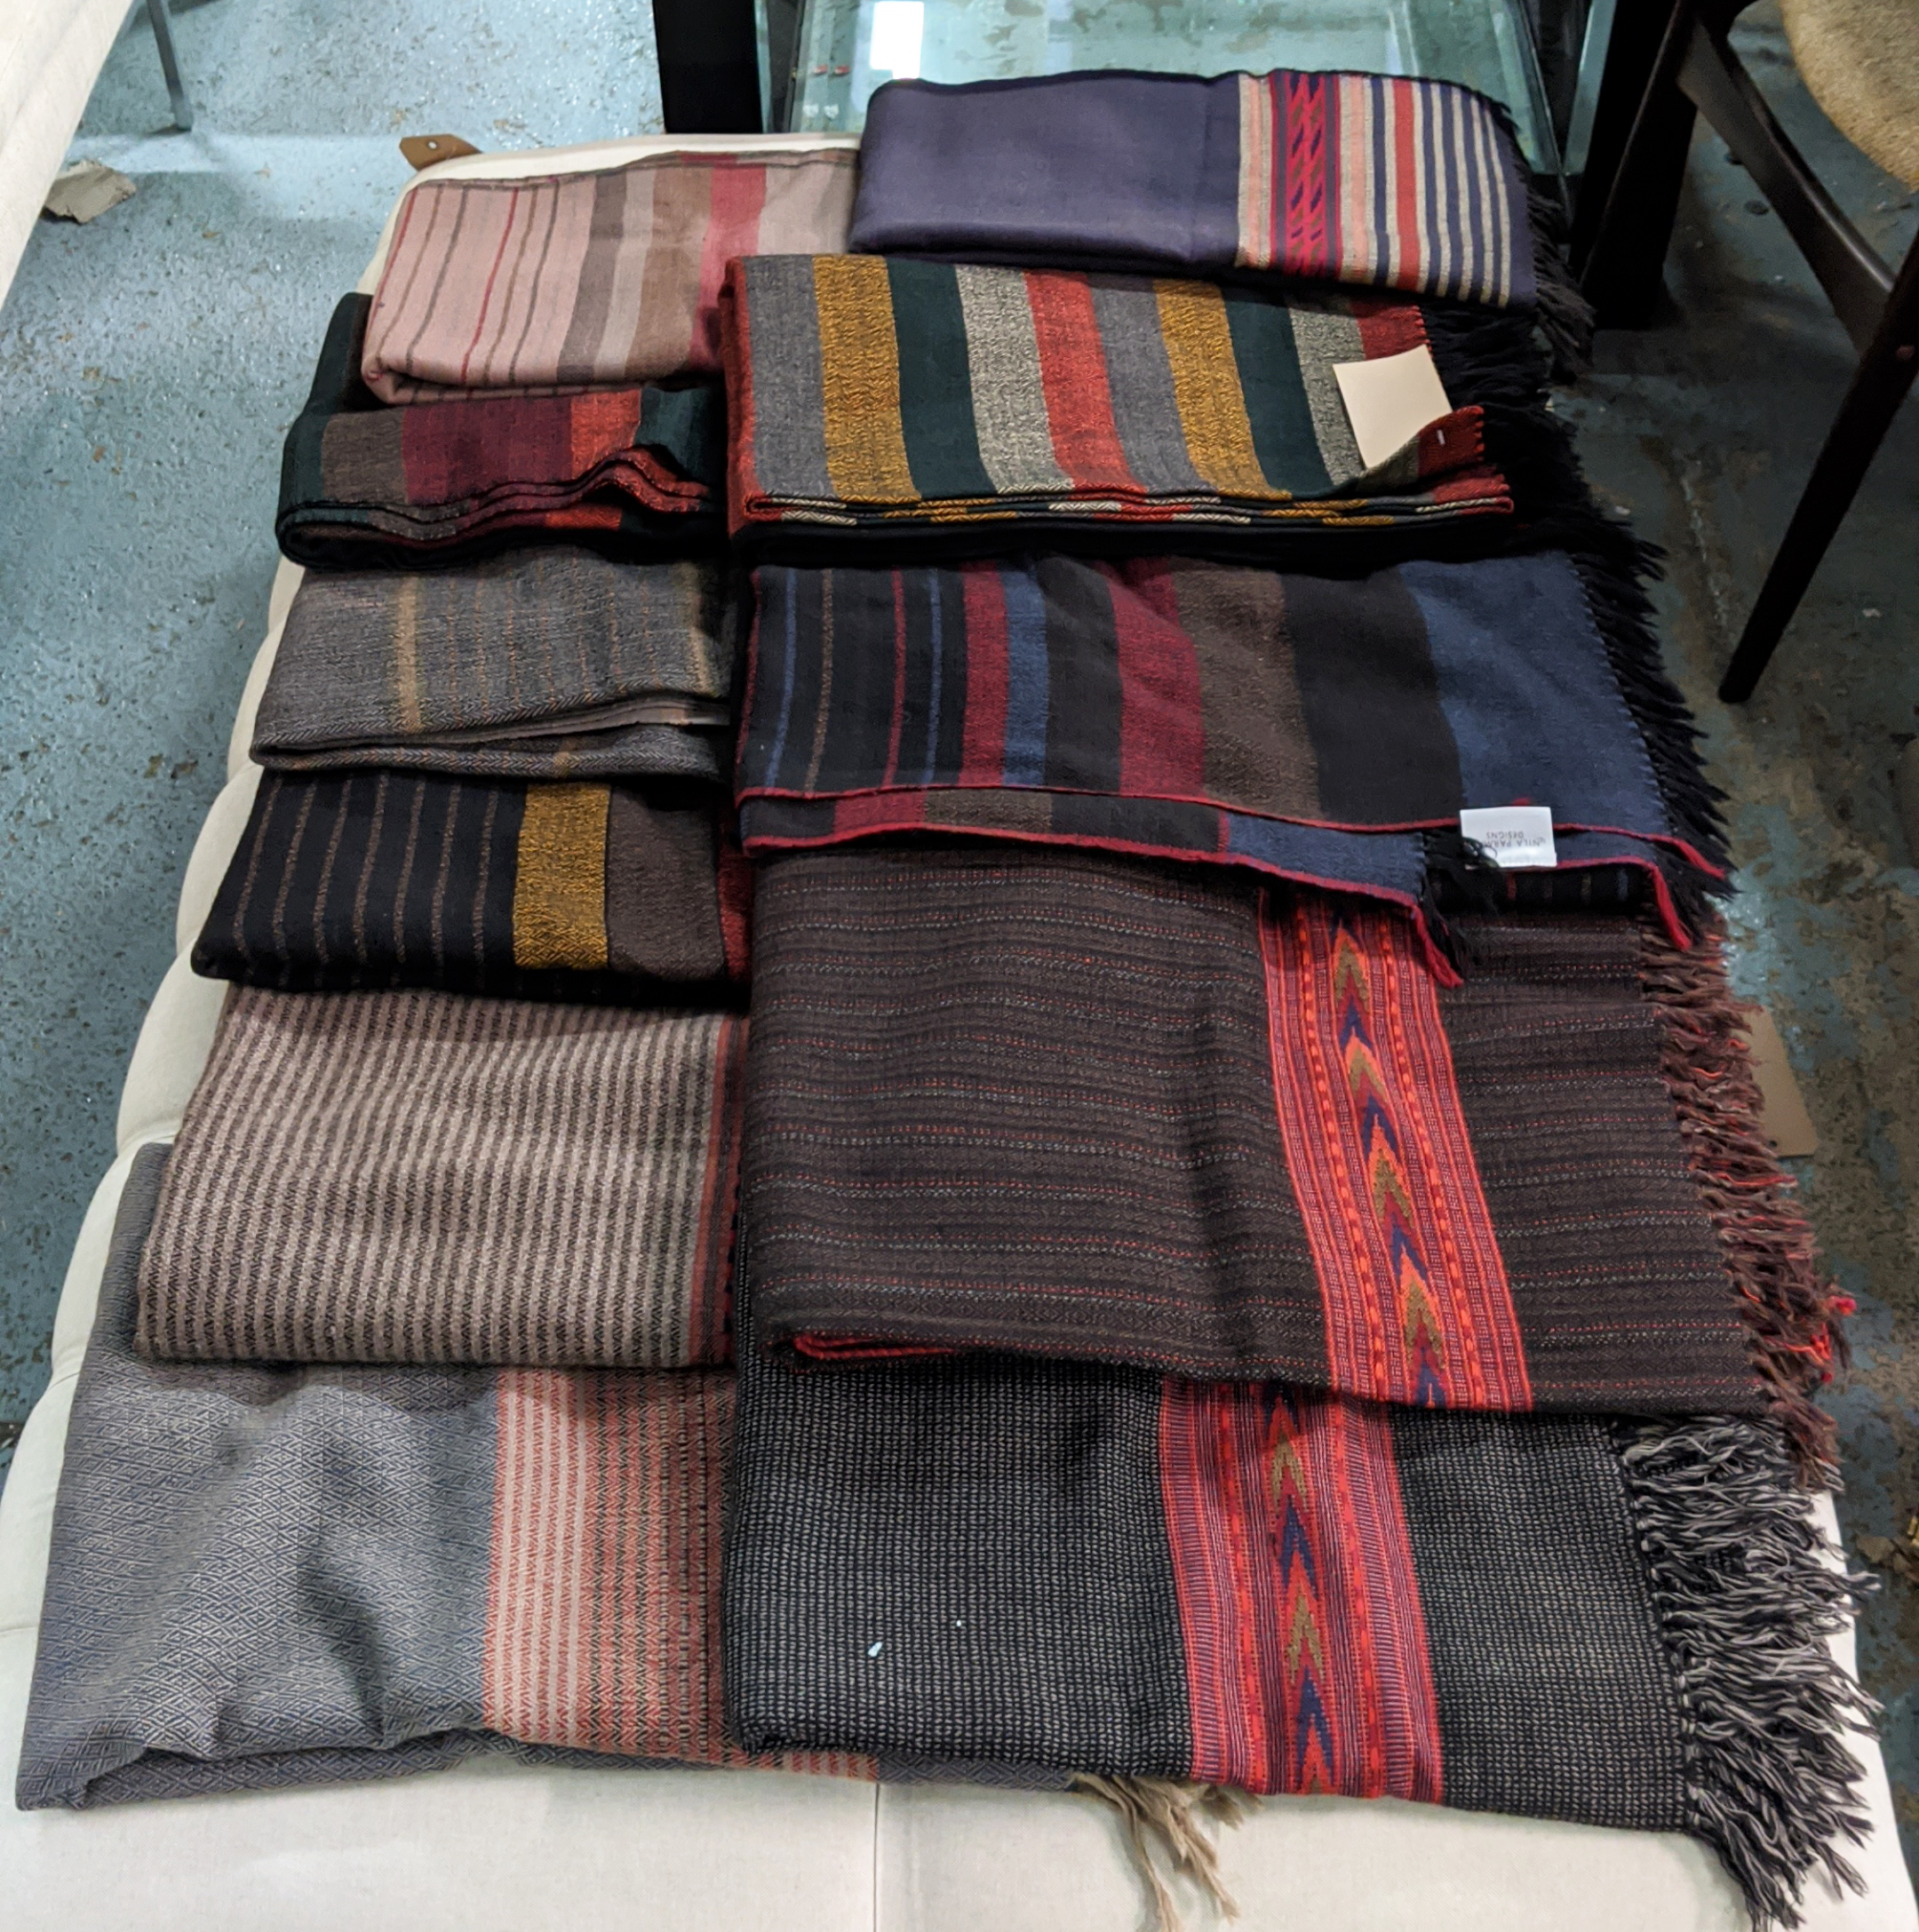 NILA PARMAR DESIGNS THROWS, a collection of eleven, various designs. (11) - Image 9 of 9